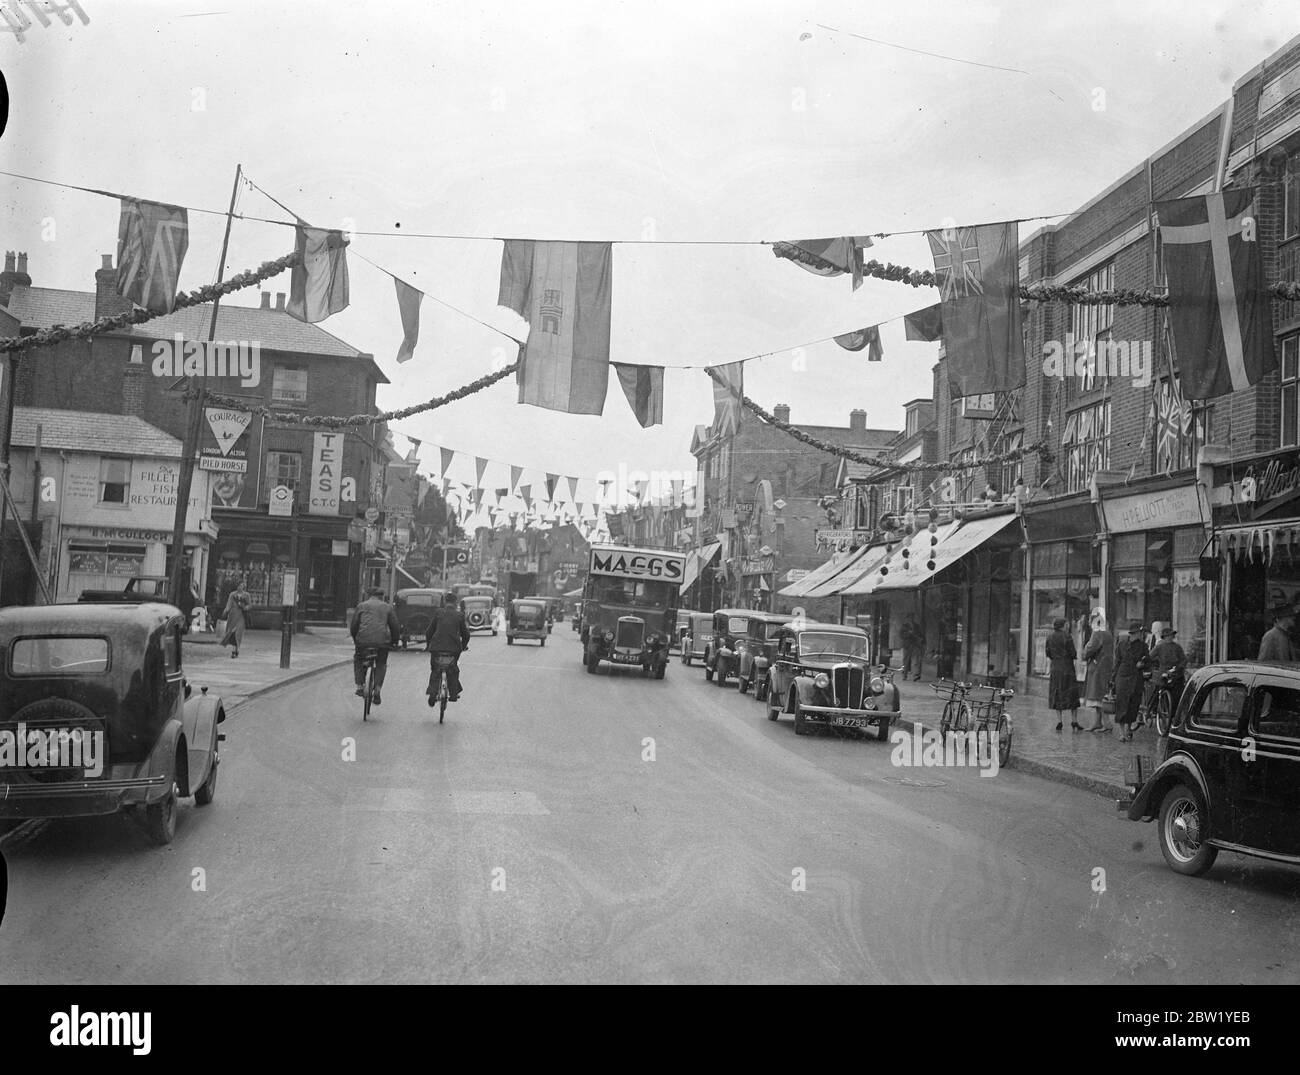 Slough prepares to welcome the King and Queen. Slough (Buckinghamshire), through which the King and Queen will drive on their State entry into Windsor, is being decorated in preparation for the Royal visit next Saturday, 12 June. Photo shows, Slough high Street decorated to welcome the King and Queen. 9 June 1937 Stock Photo